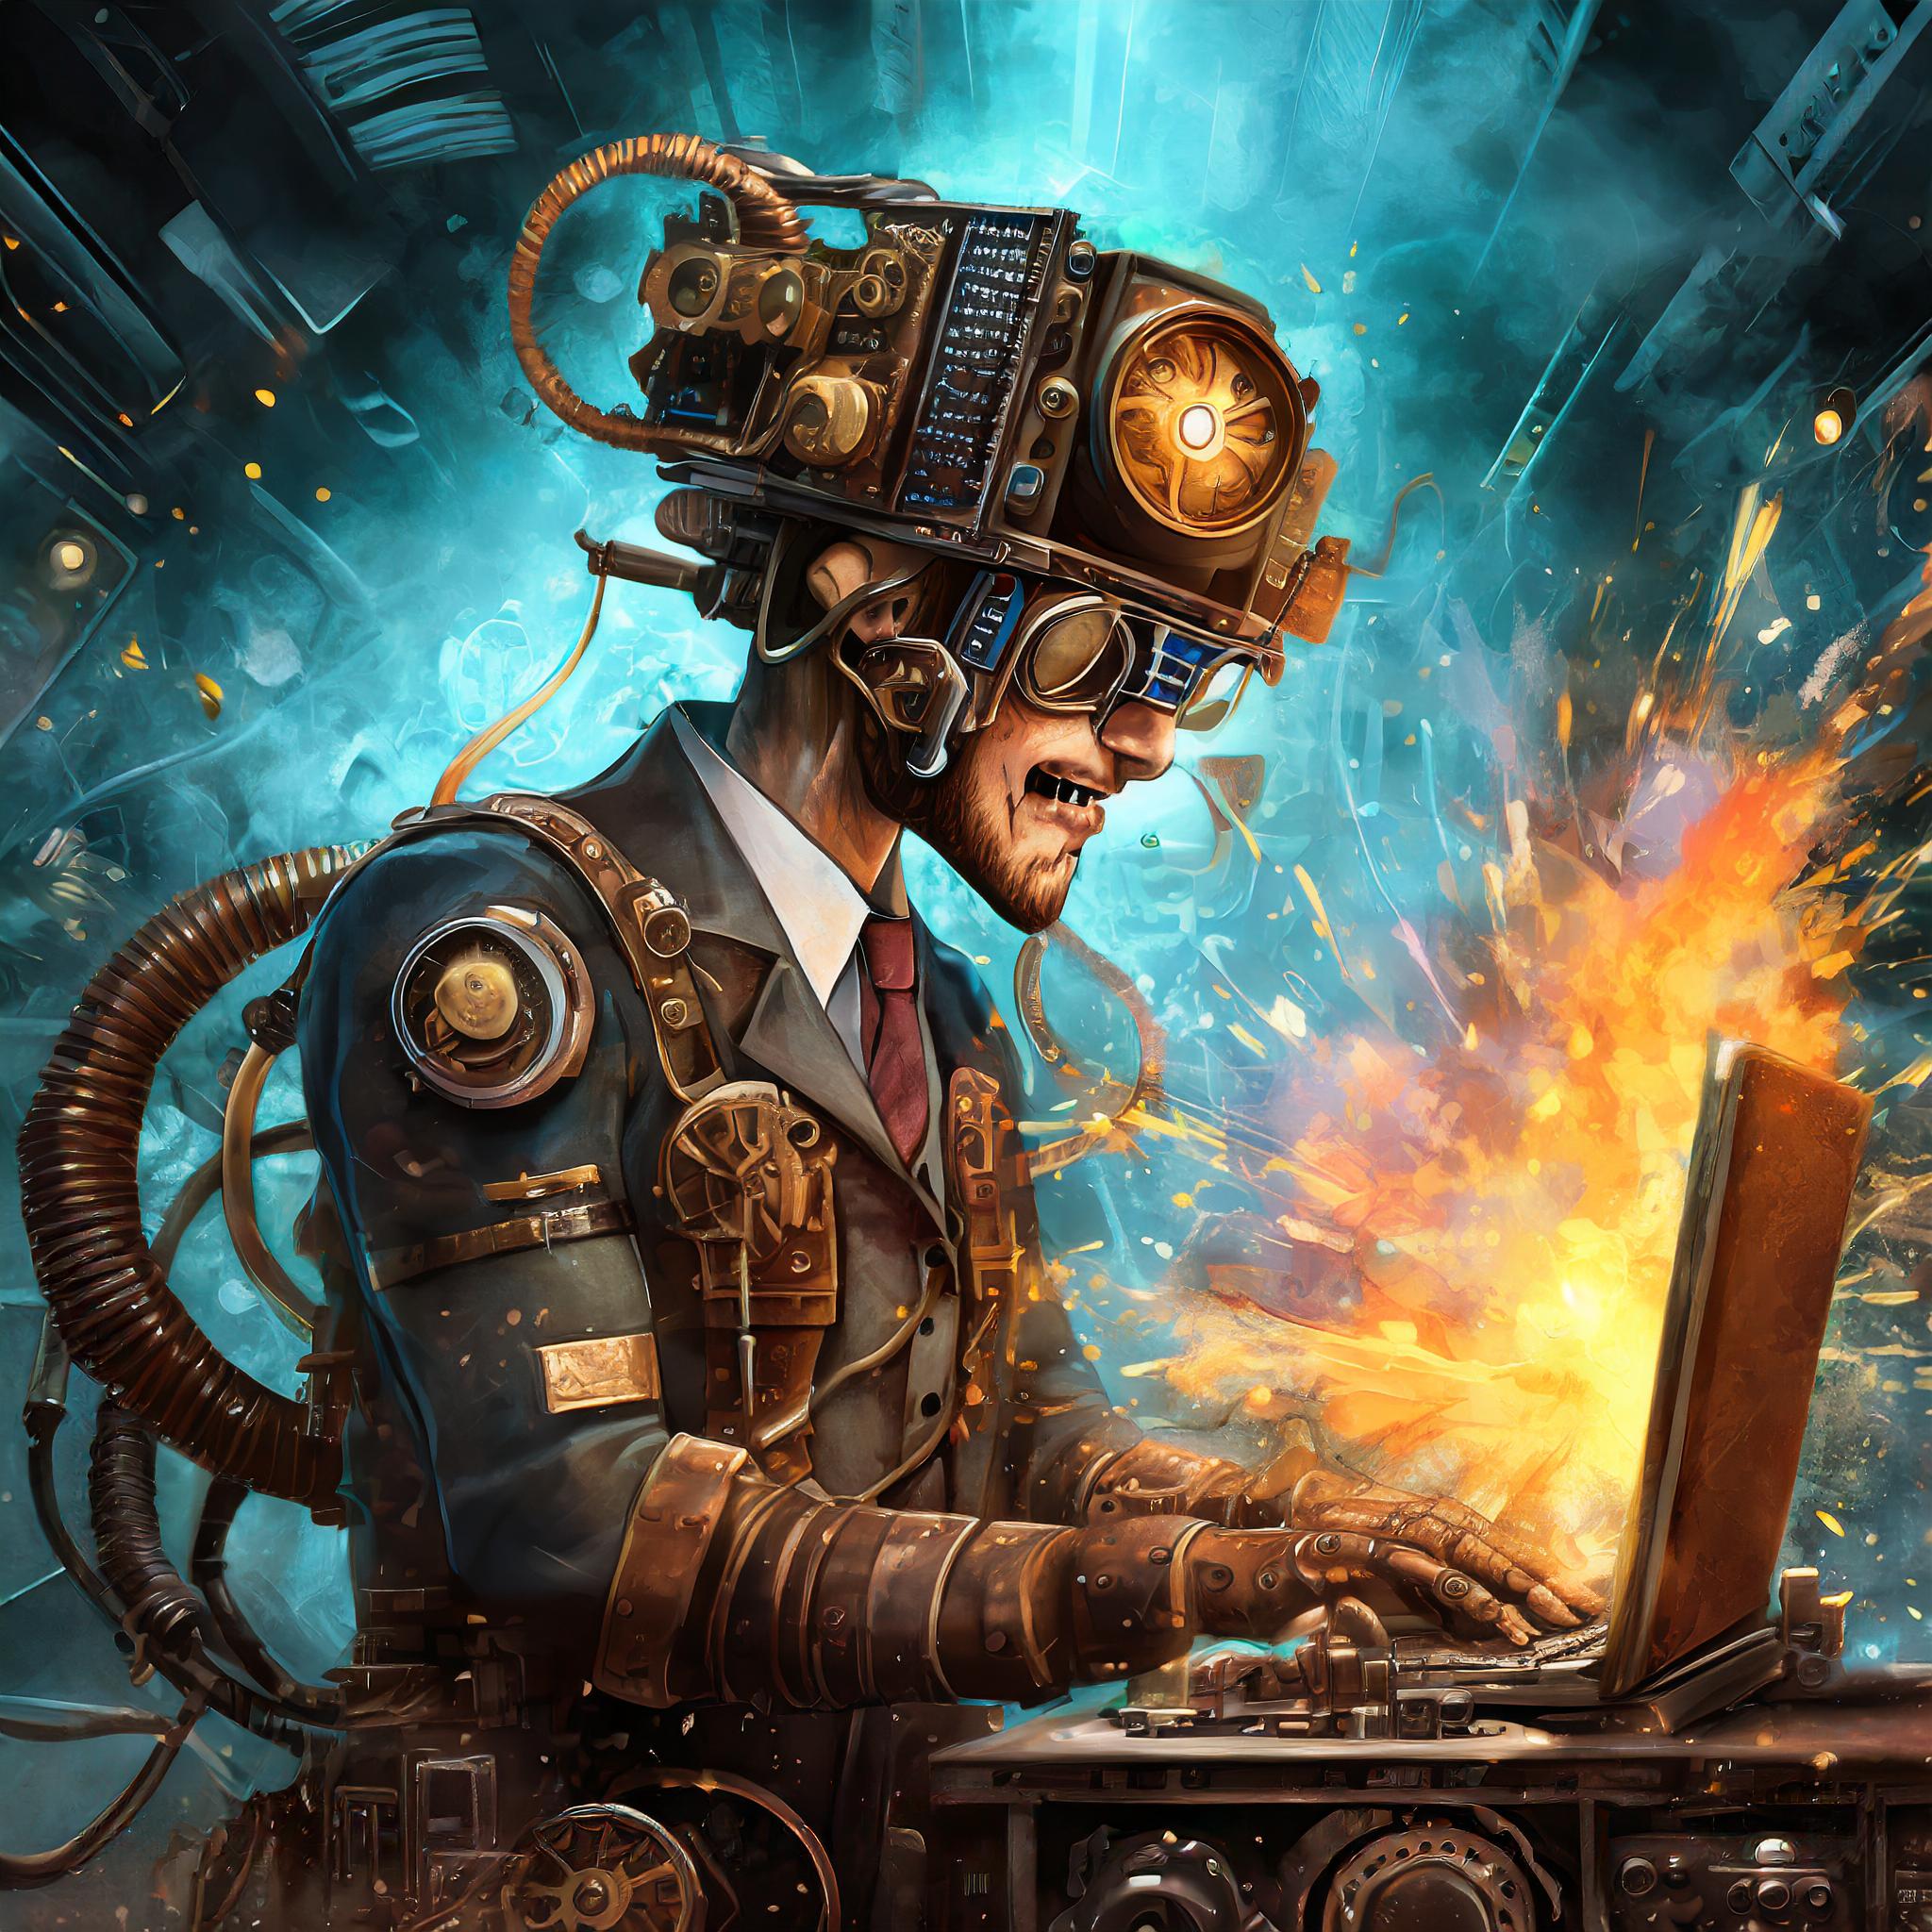 Firefly steampunk computer geek with exploding computer 93646.jpg